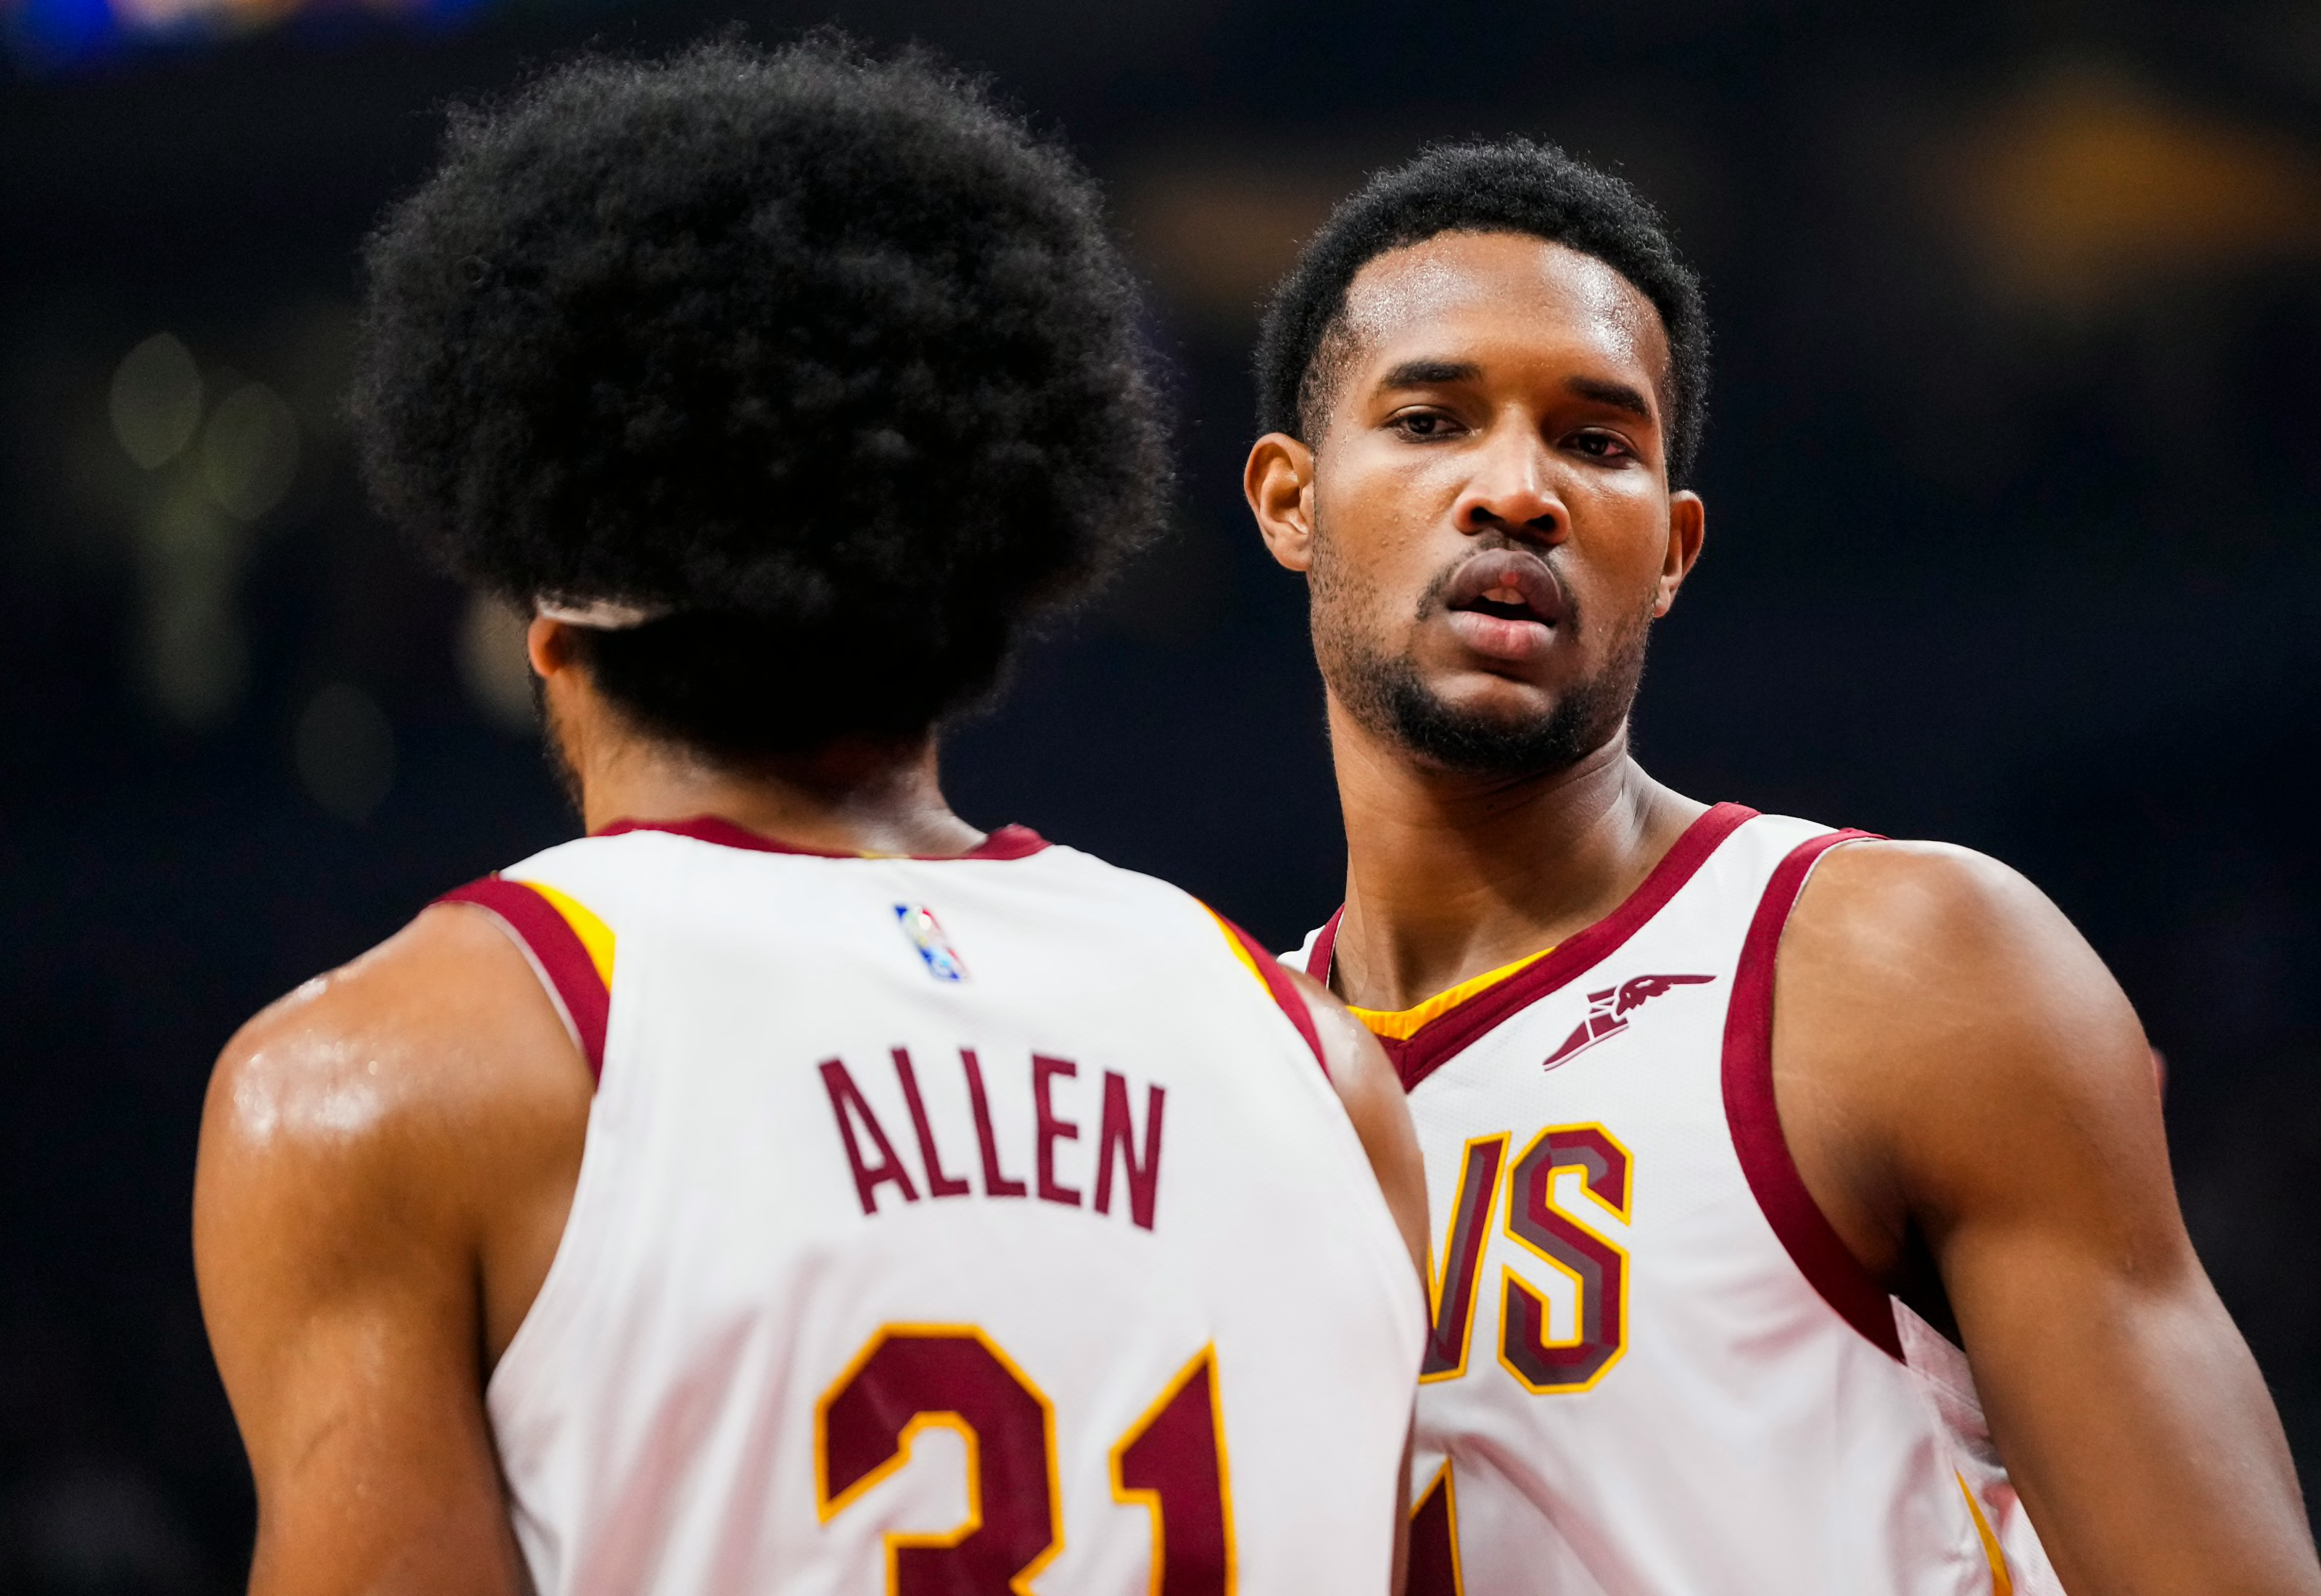 Could the Cavaliers' double bigs catapult a deep playoff run?